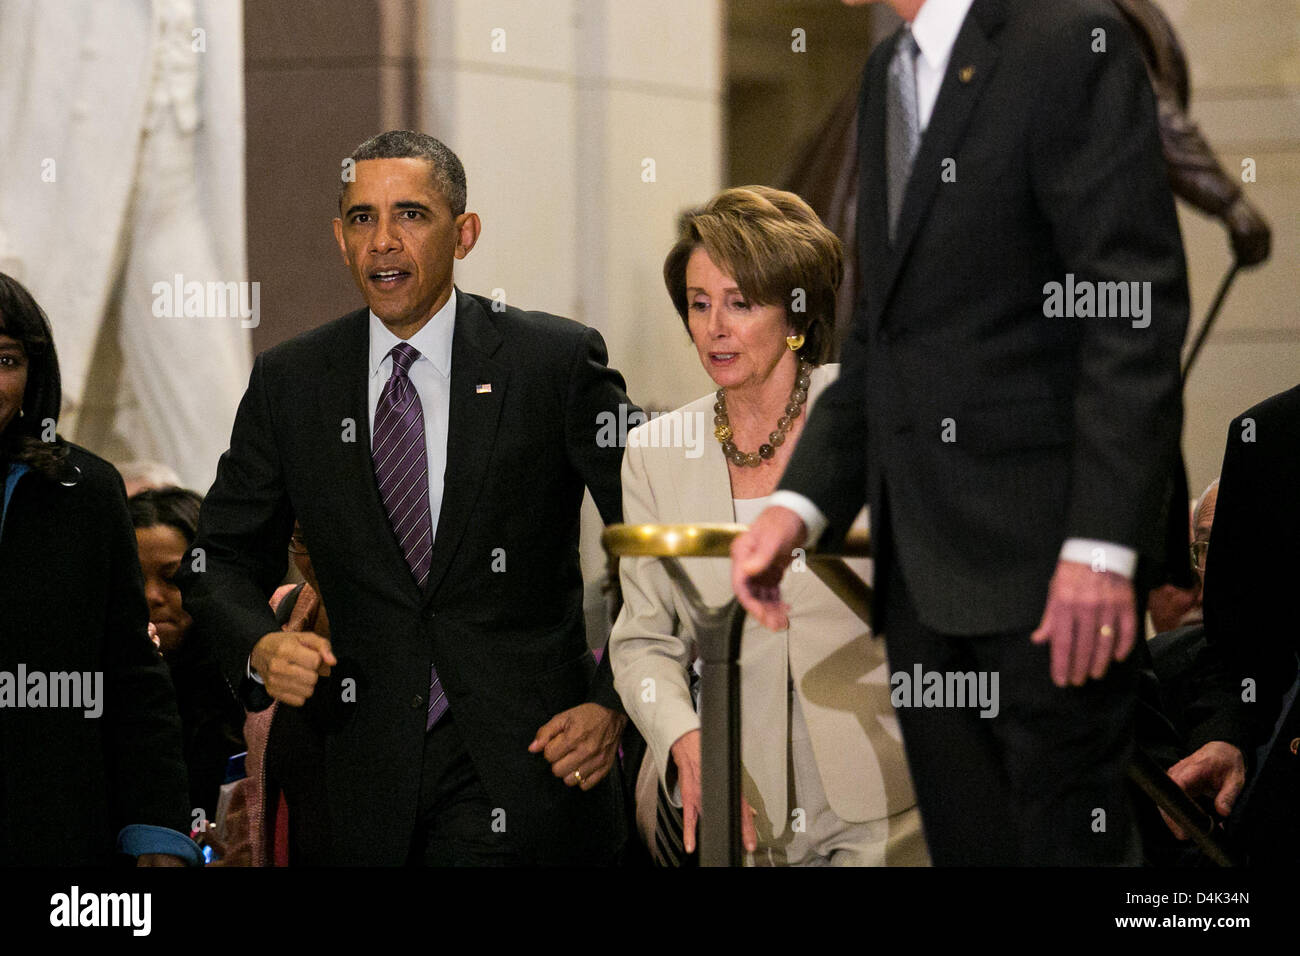 Washington DC, USA. 14th March 2013. United States President Barack Obama, walking with U.S. House Democratic Leader Nancy Pelosi (Democrat of California), leaves a meeting at the U.S. Capitol with the House Democratic Caucus, on Capitol Hill in Washington, Thursday, March 14, 2013. Earlier in the day, President Obama also met with the Senate Republican Conference. .Credit: Drew Angerer / Pool via CNP/dpa/Alamy Live News Stock Photo